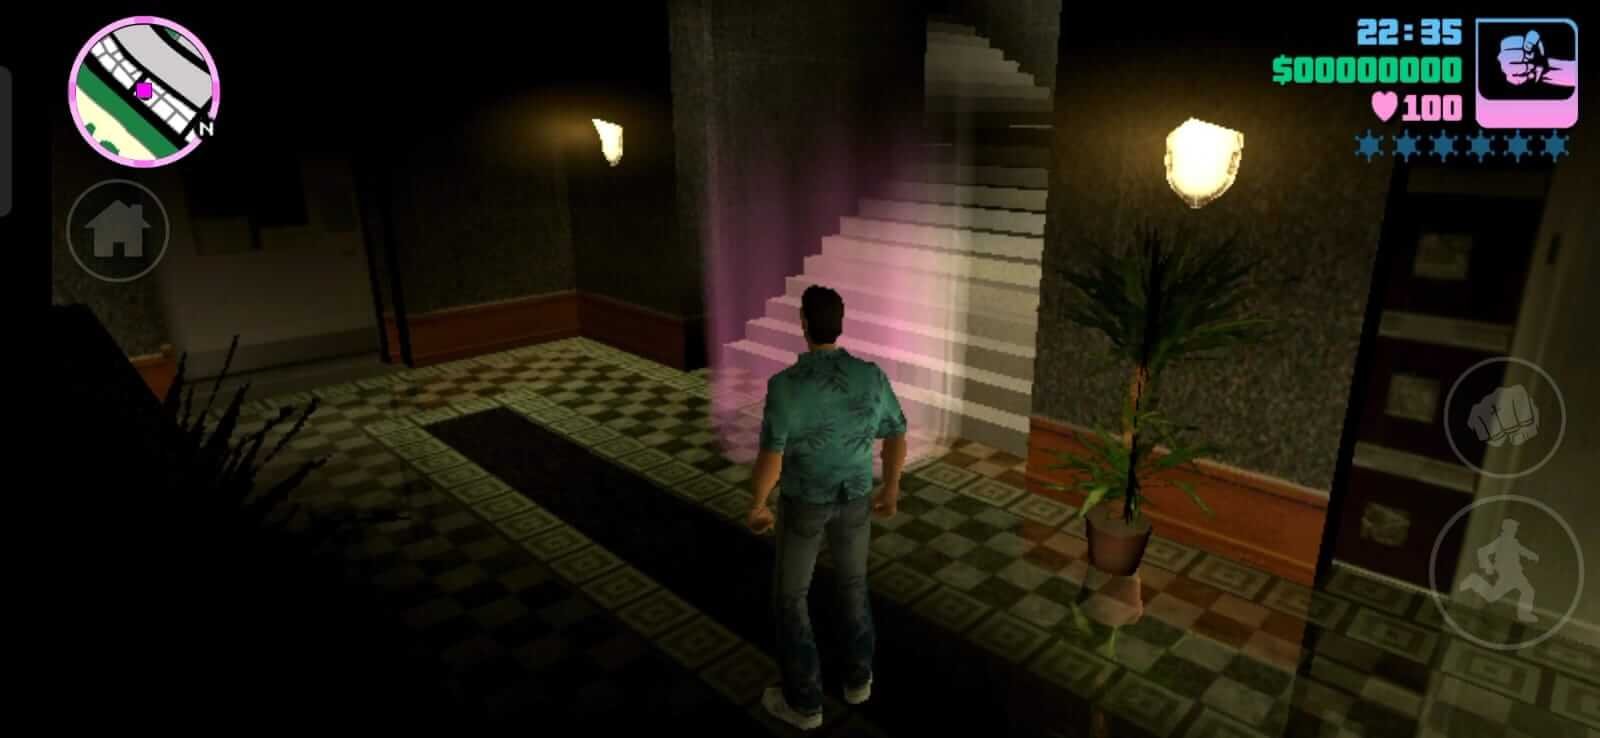 GTA Vice City 1.03 APK OBB: All You need to know